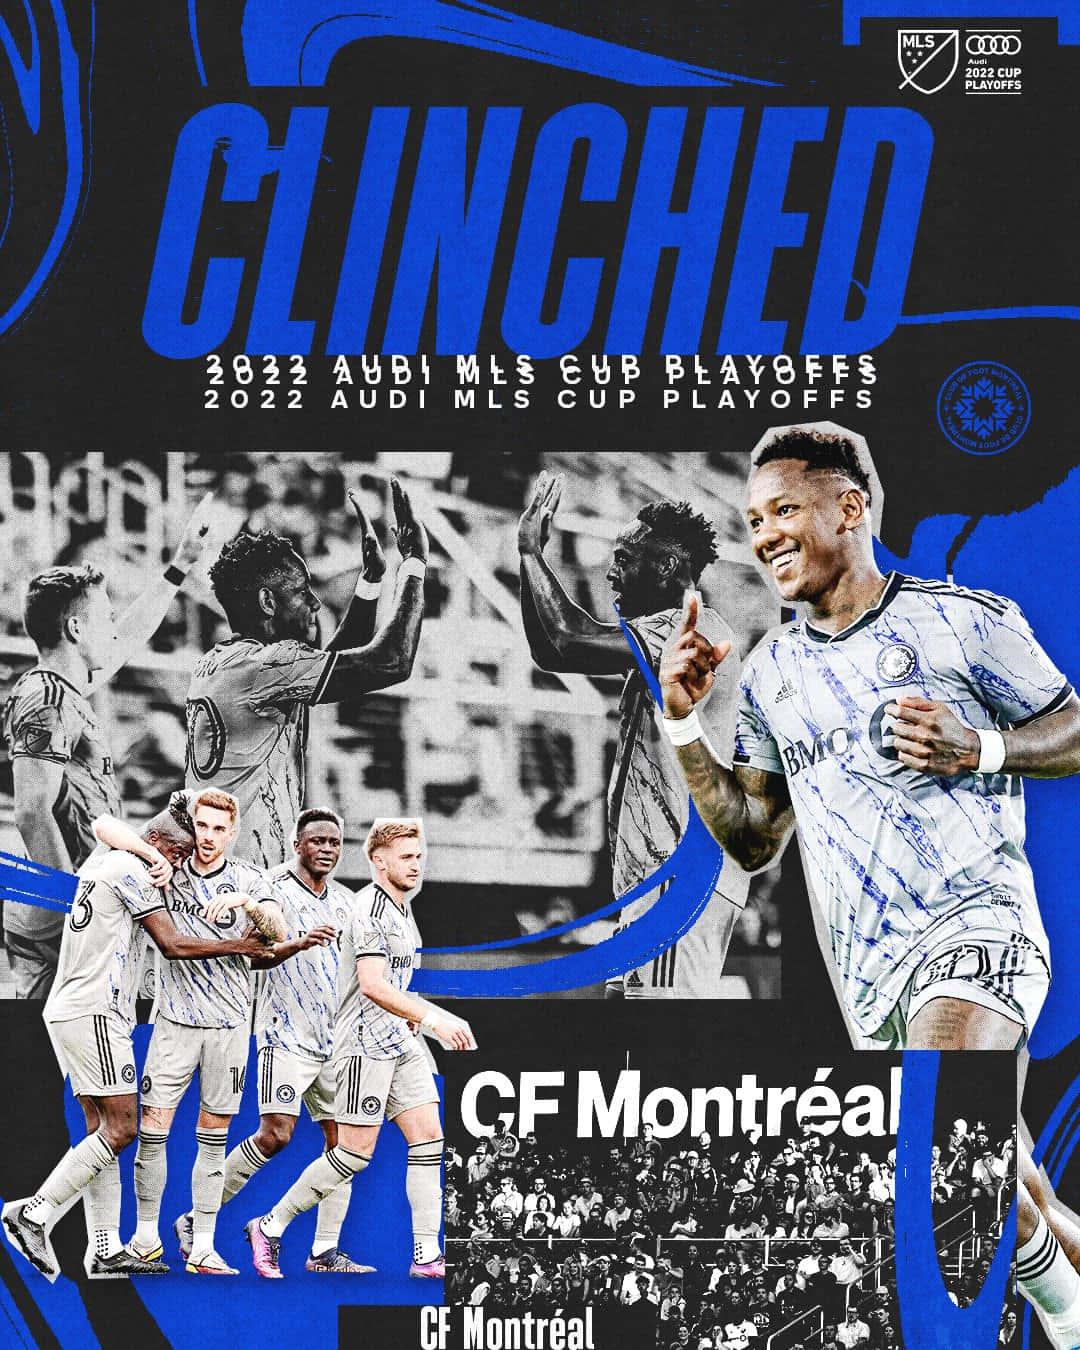 CF Montréal Clinched A Spot In The 2022 MLS Cup Playoffs Wallpaper